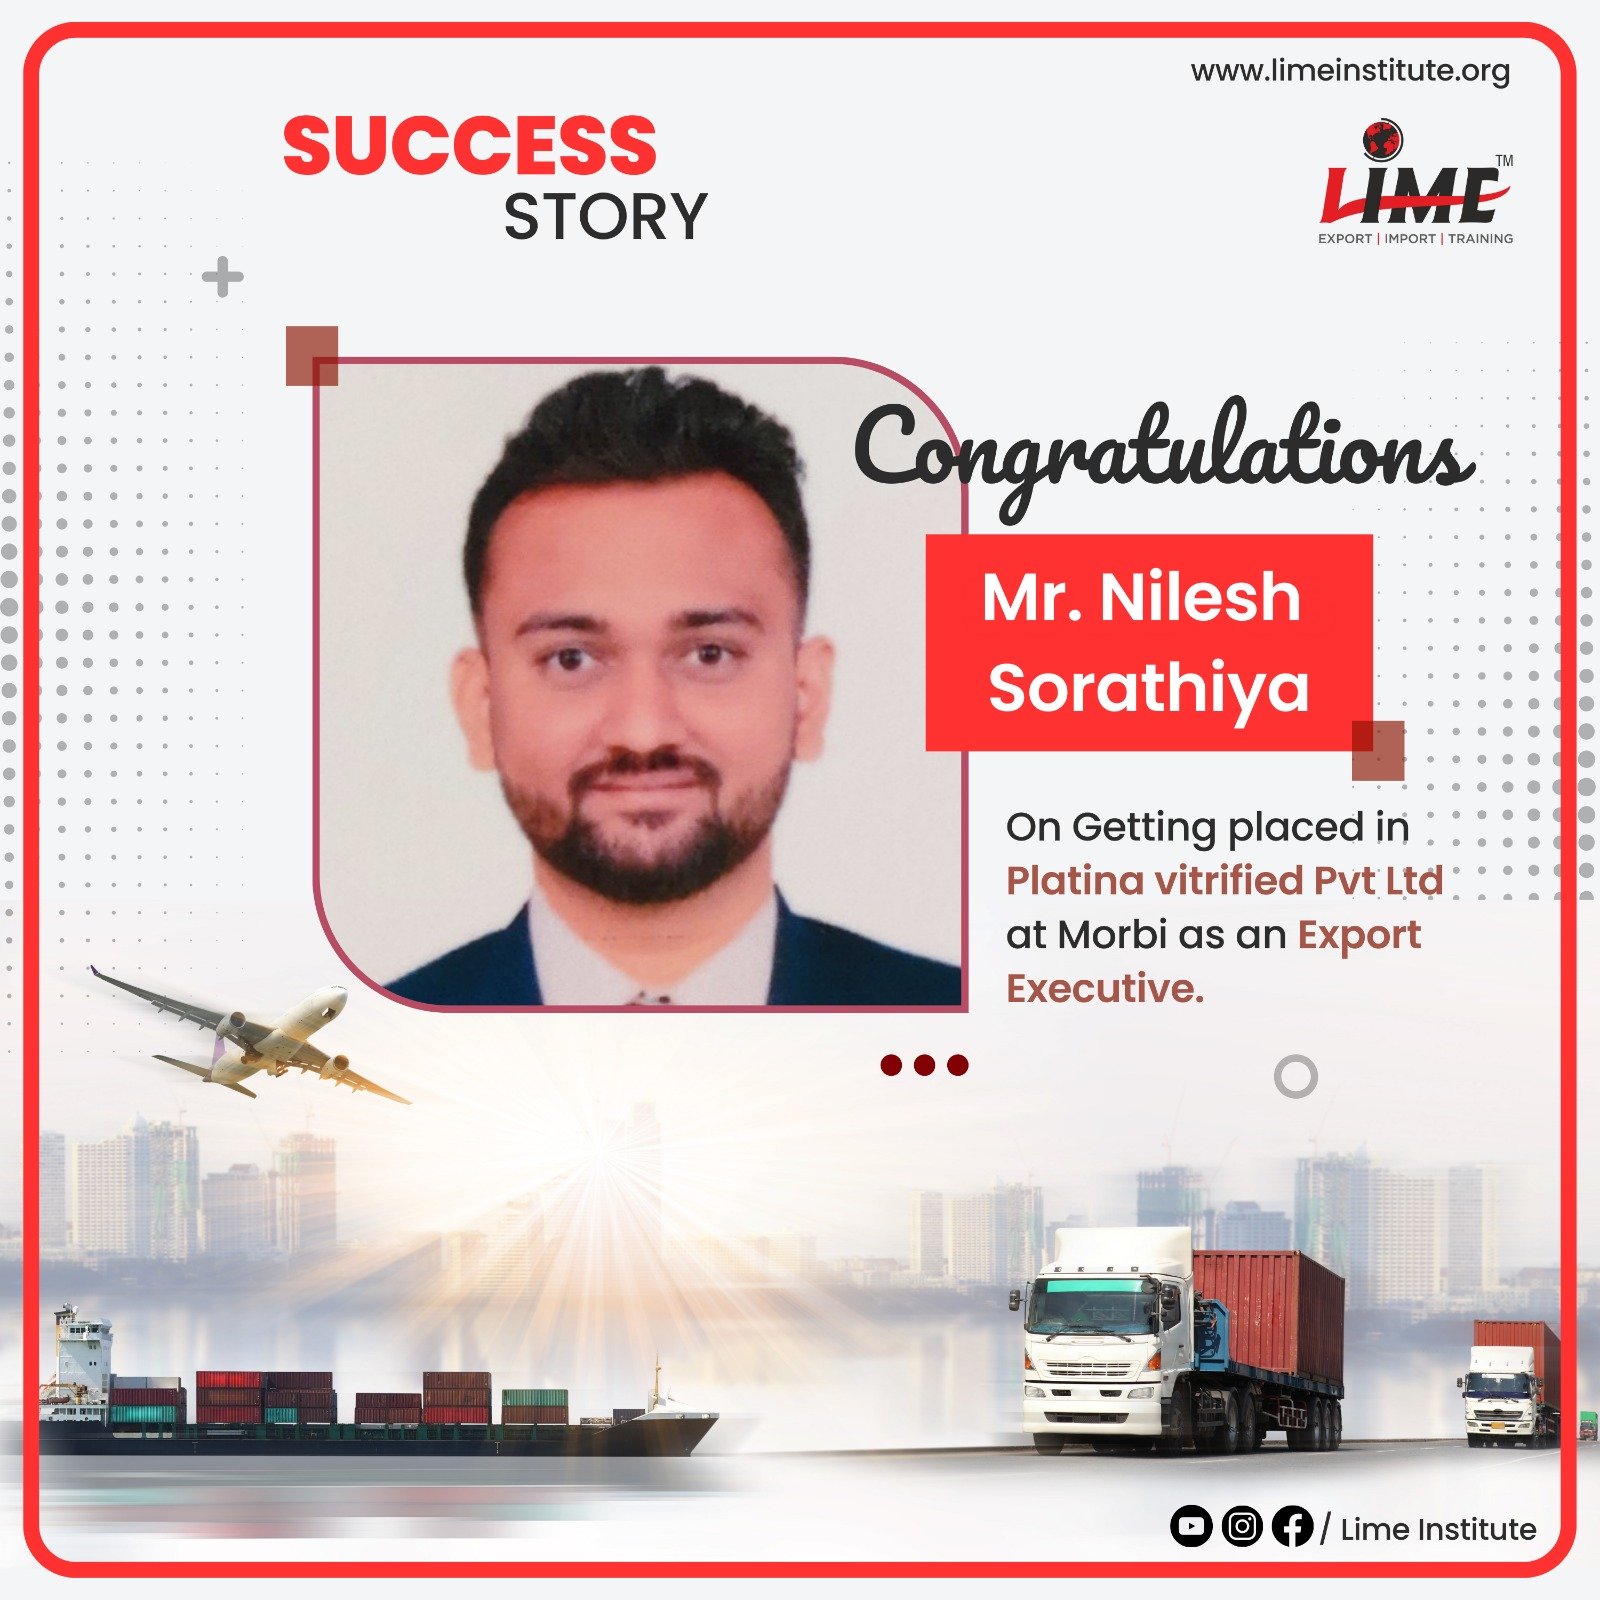 So proud of our amazing student Nilesh Sorathiya for achieving such great success in his career!